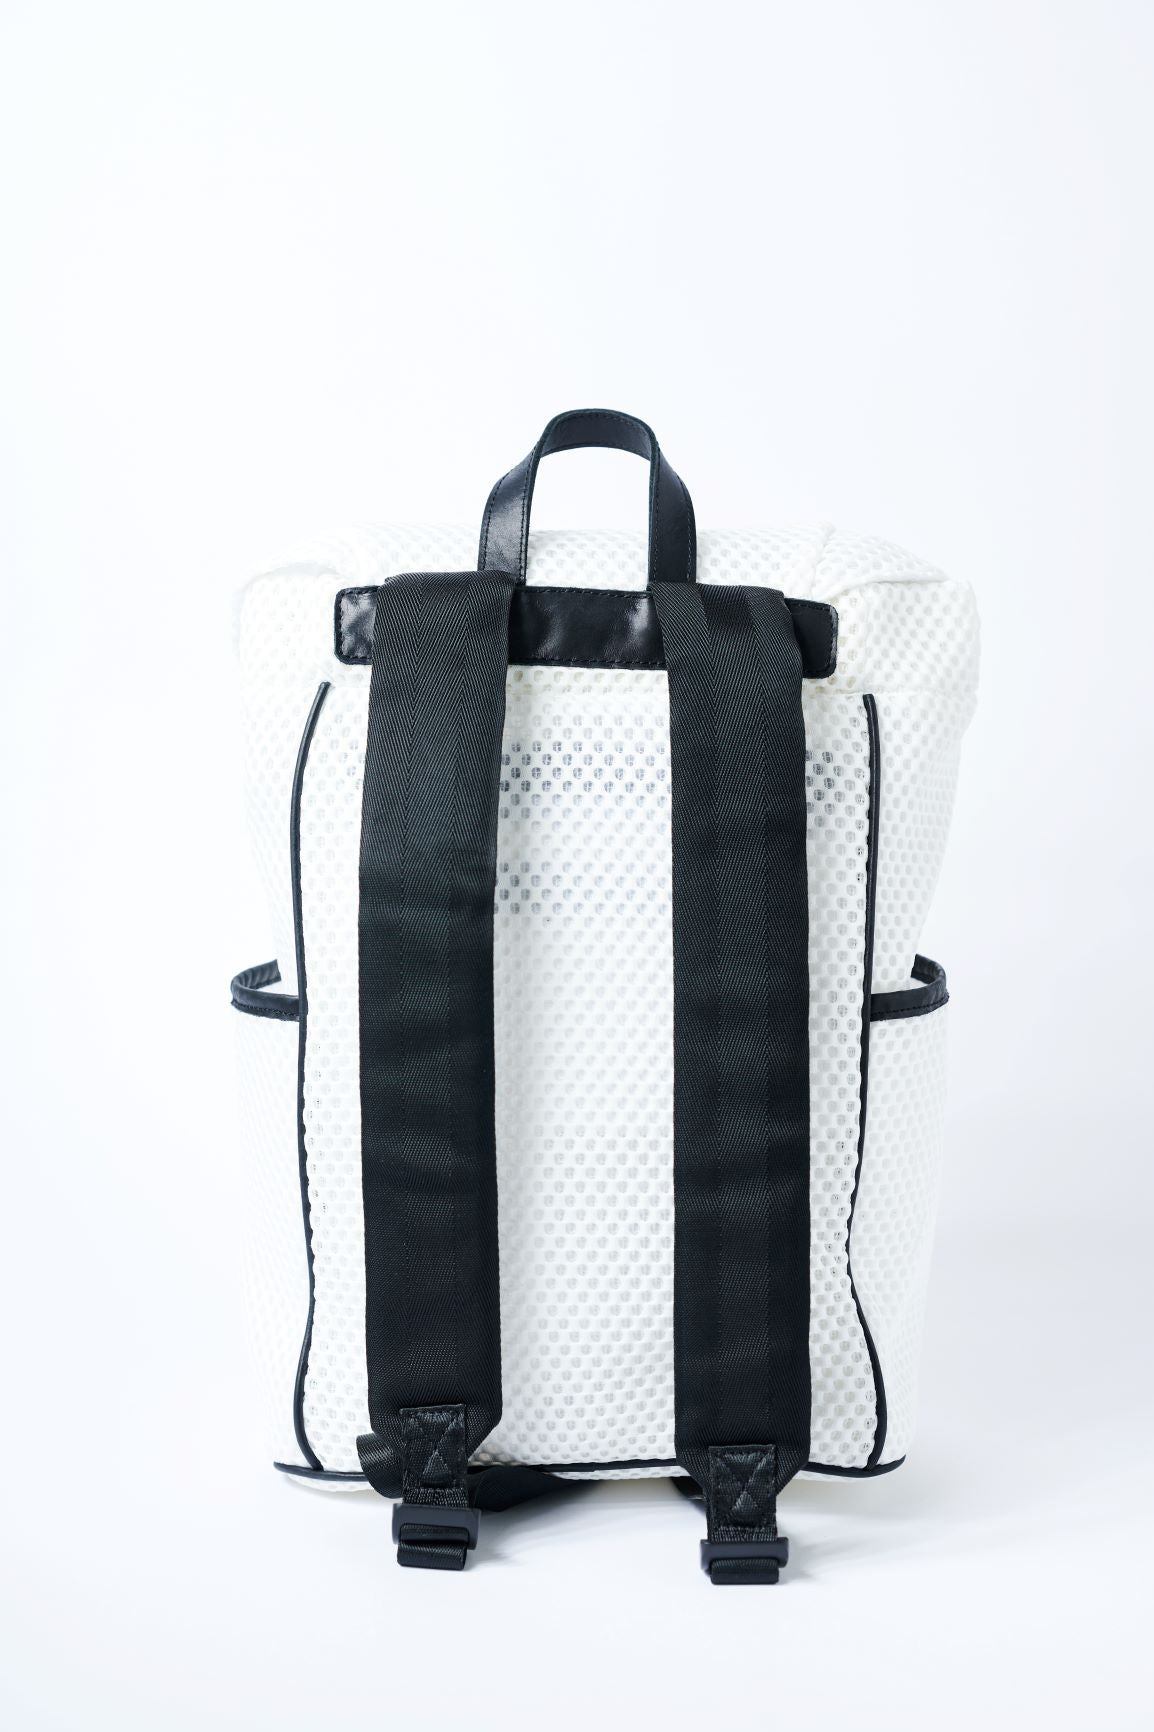 Back view of white mesh backpack with leather details and clear drawstring top.